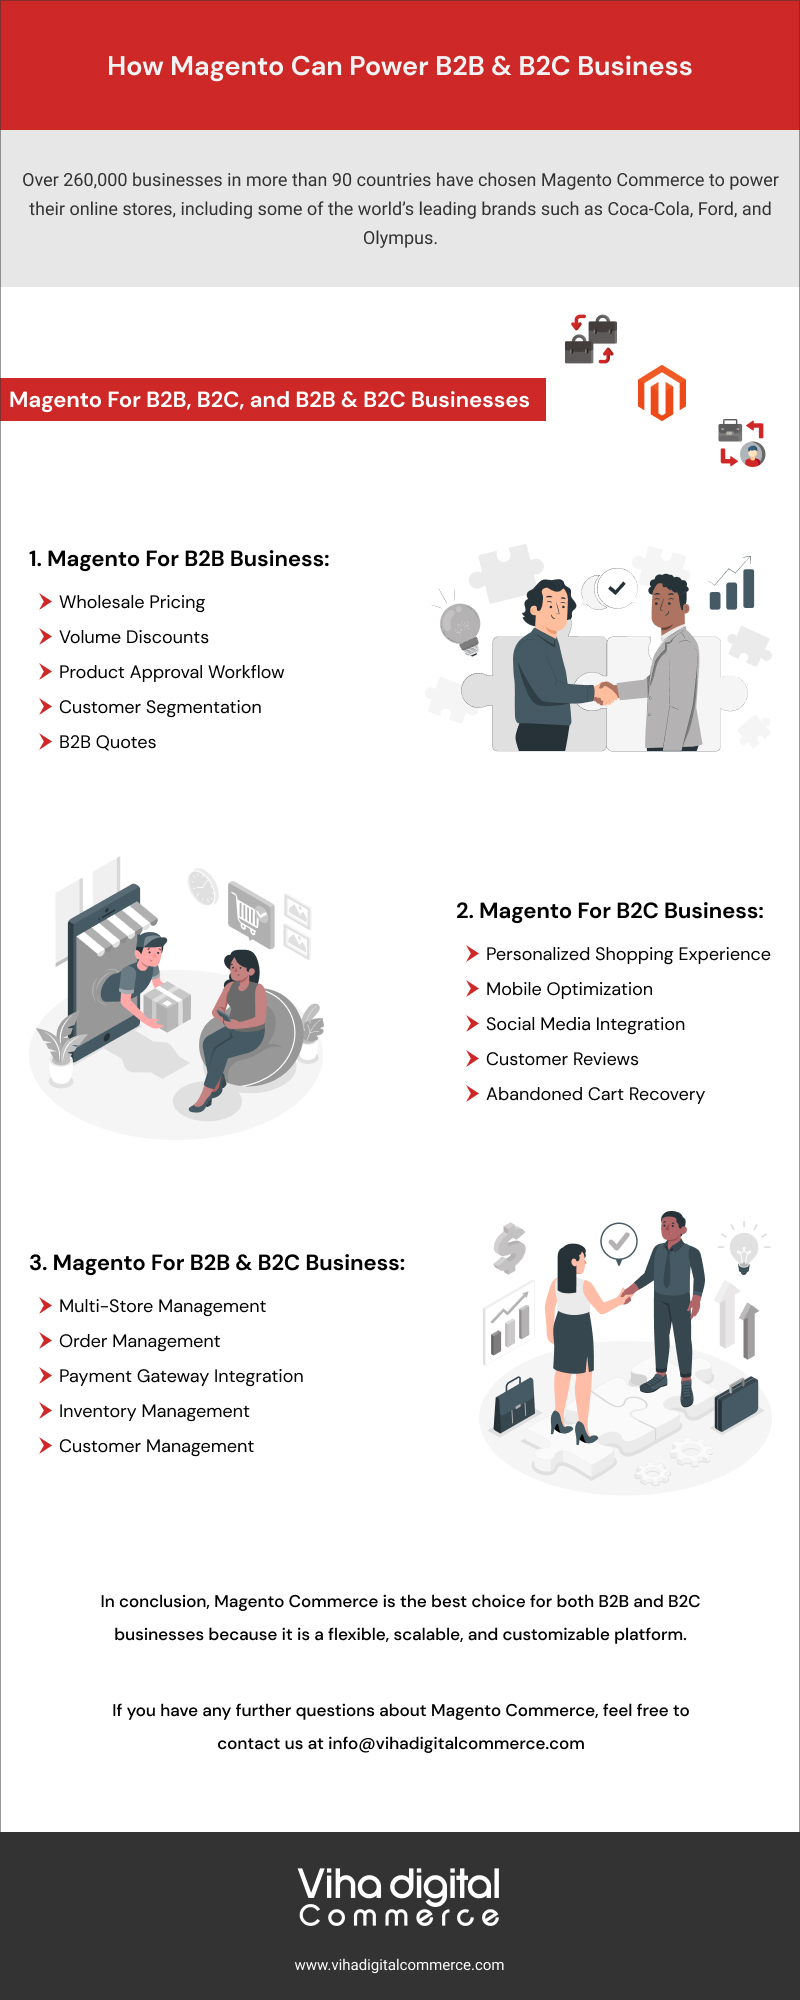 How Magento Can Power B2B & B2C Business